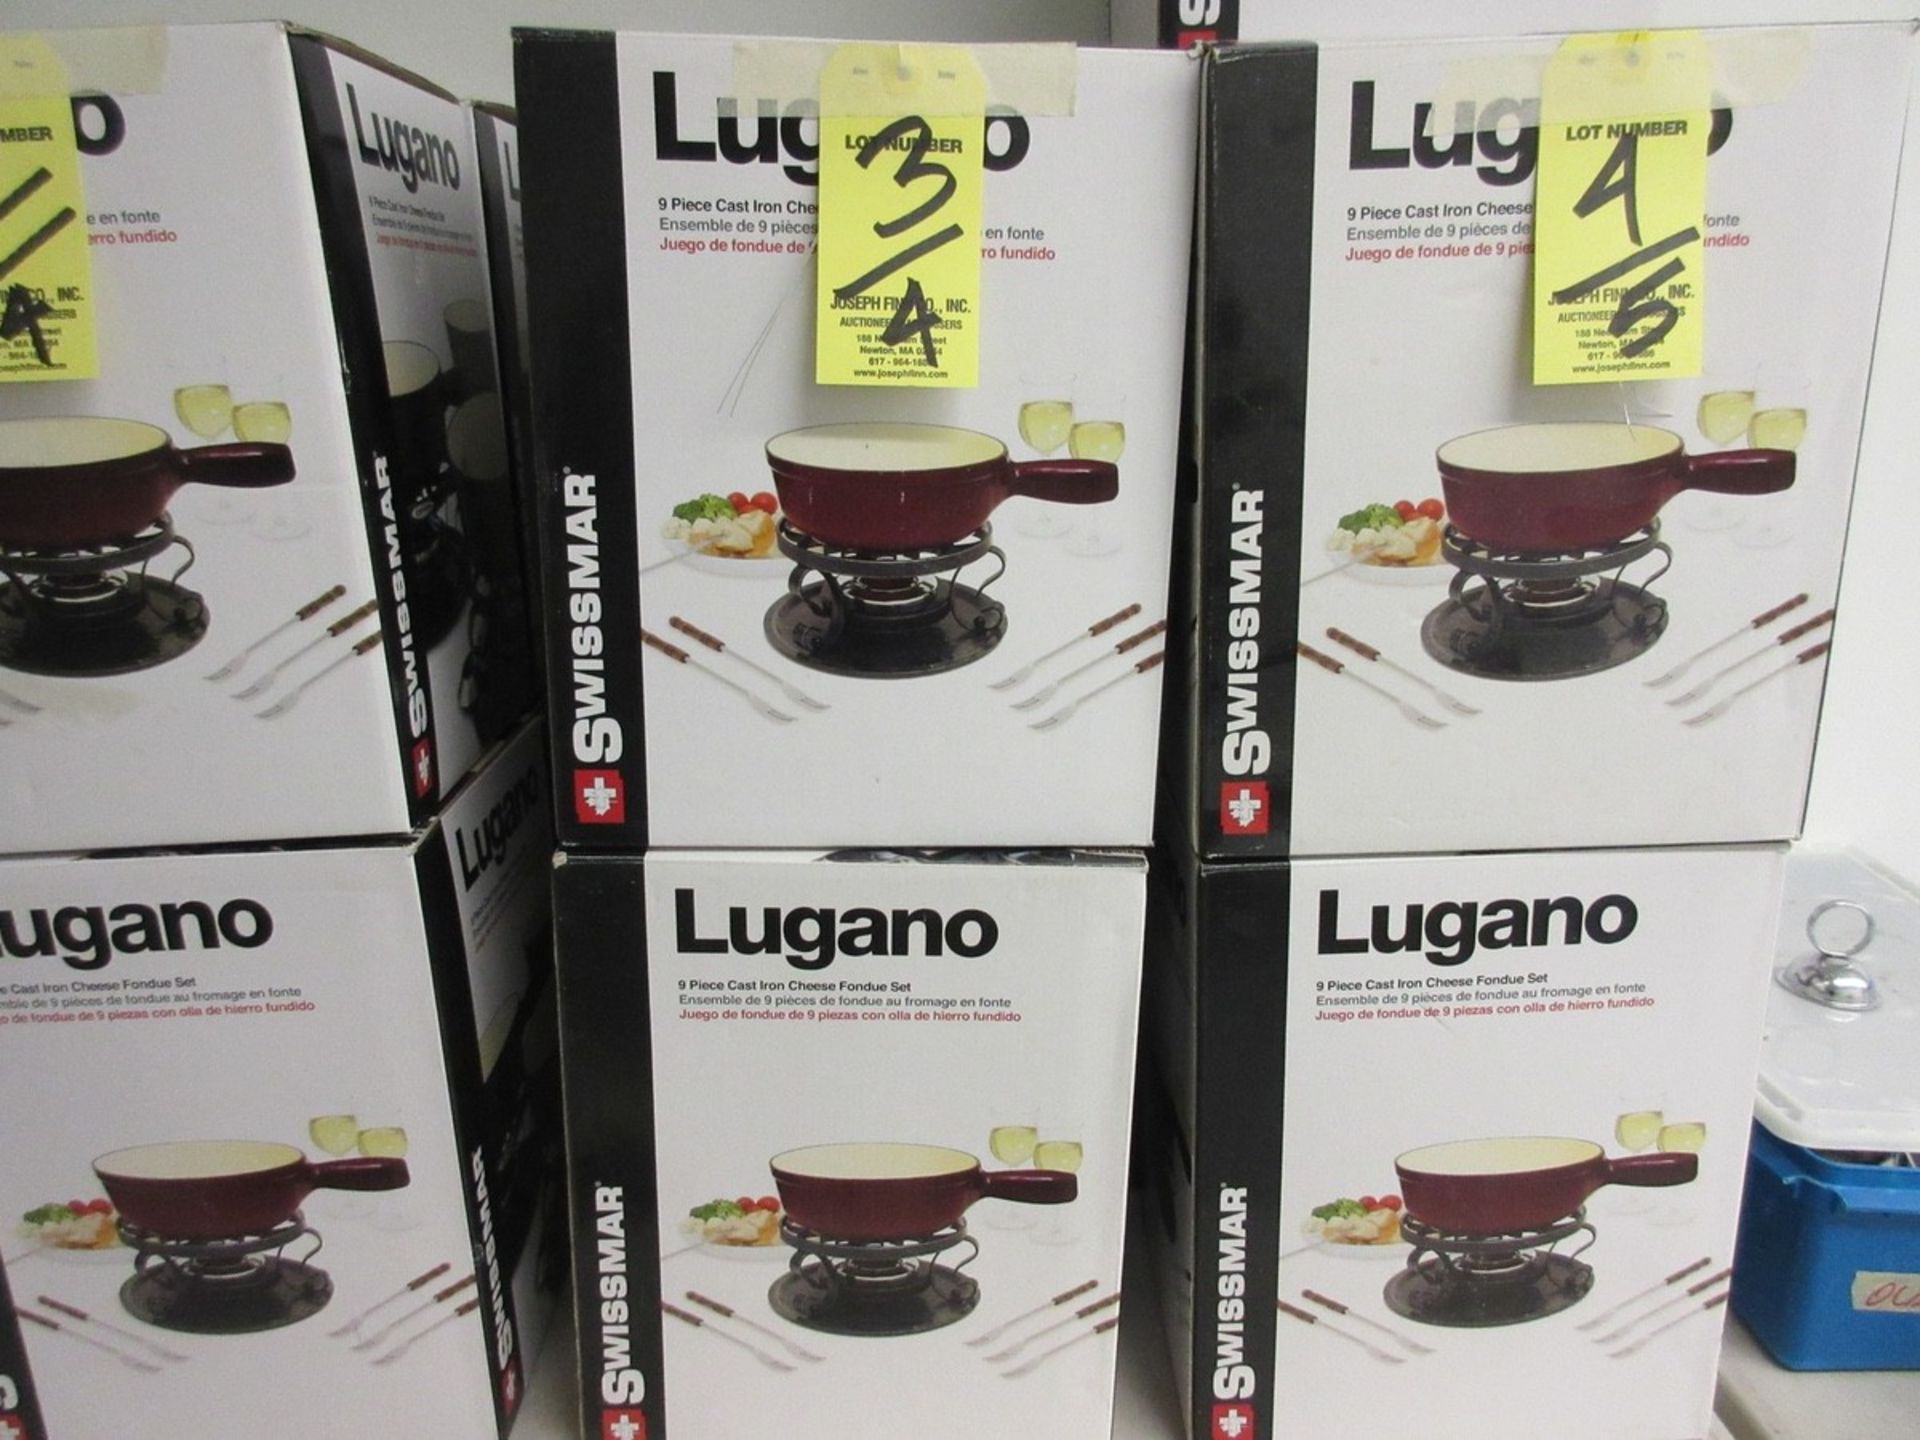 LOT (4) Lugano 9-Piece Cast Iron Cheese Fondue Sets in Boxes